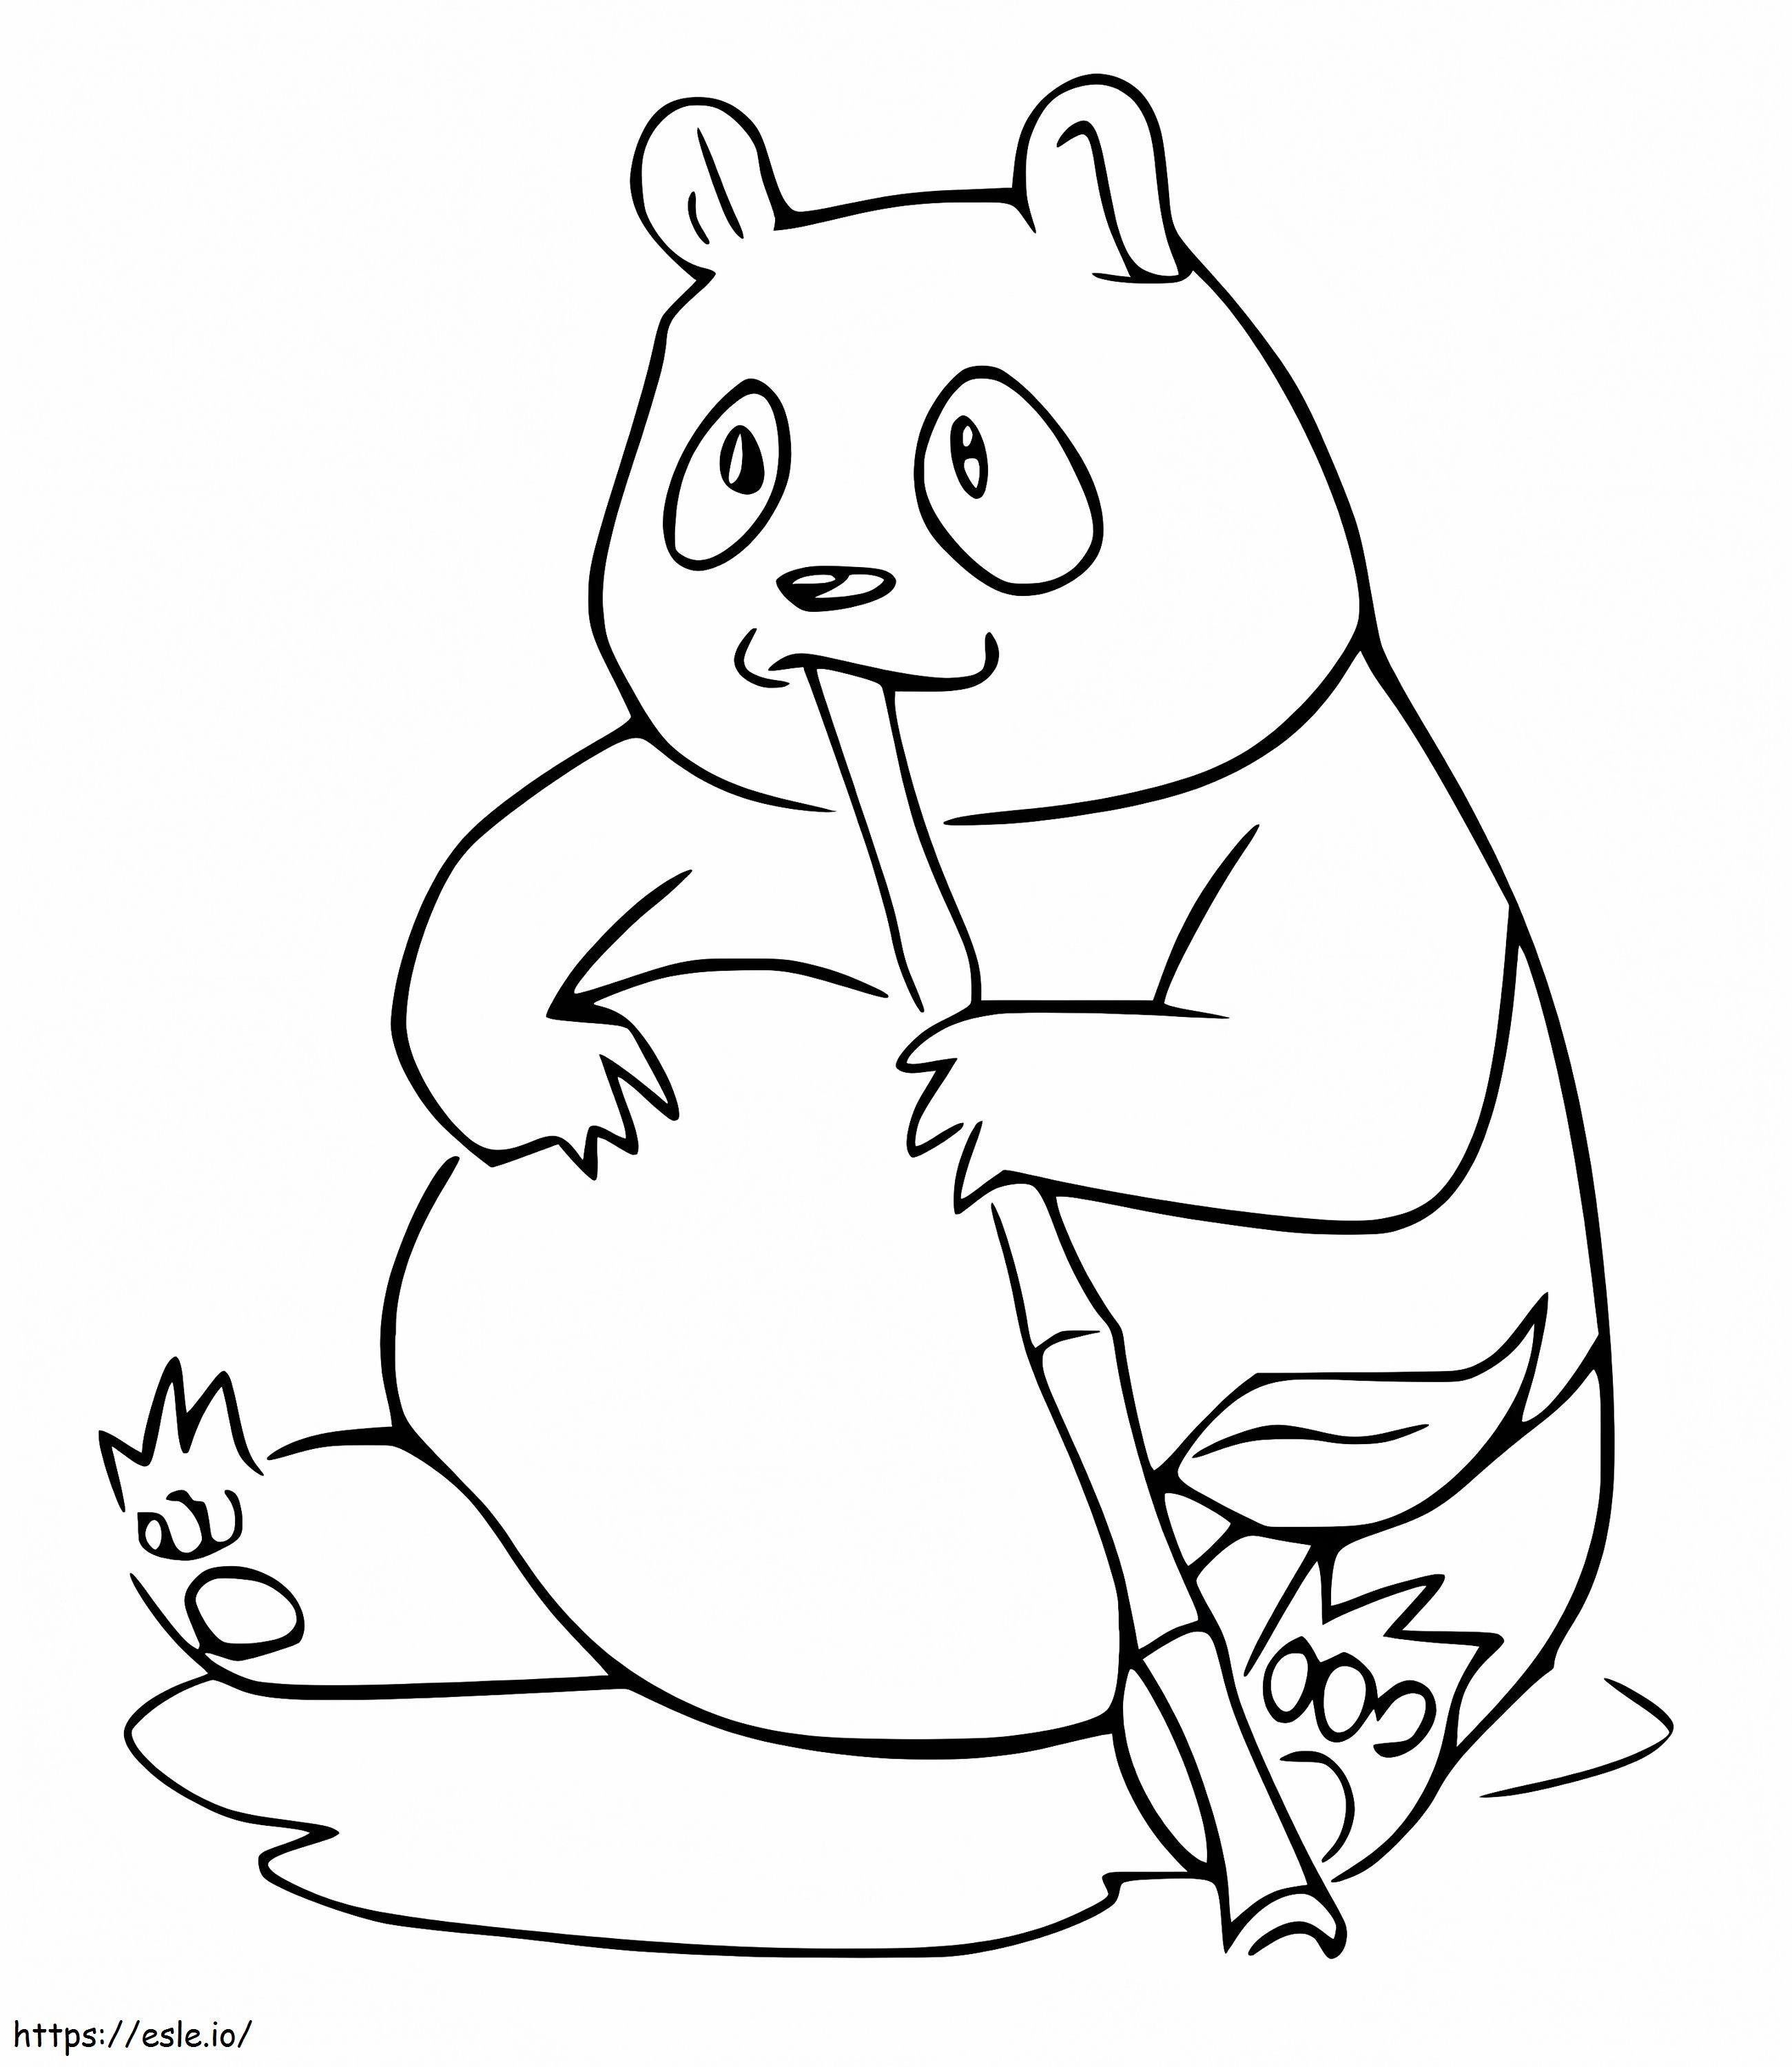 One Panda 1 coloring page